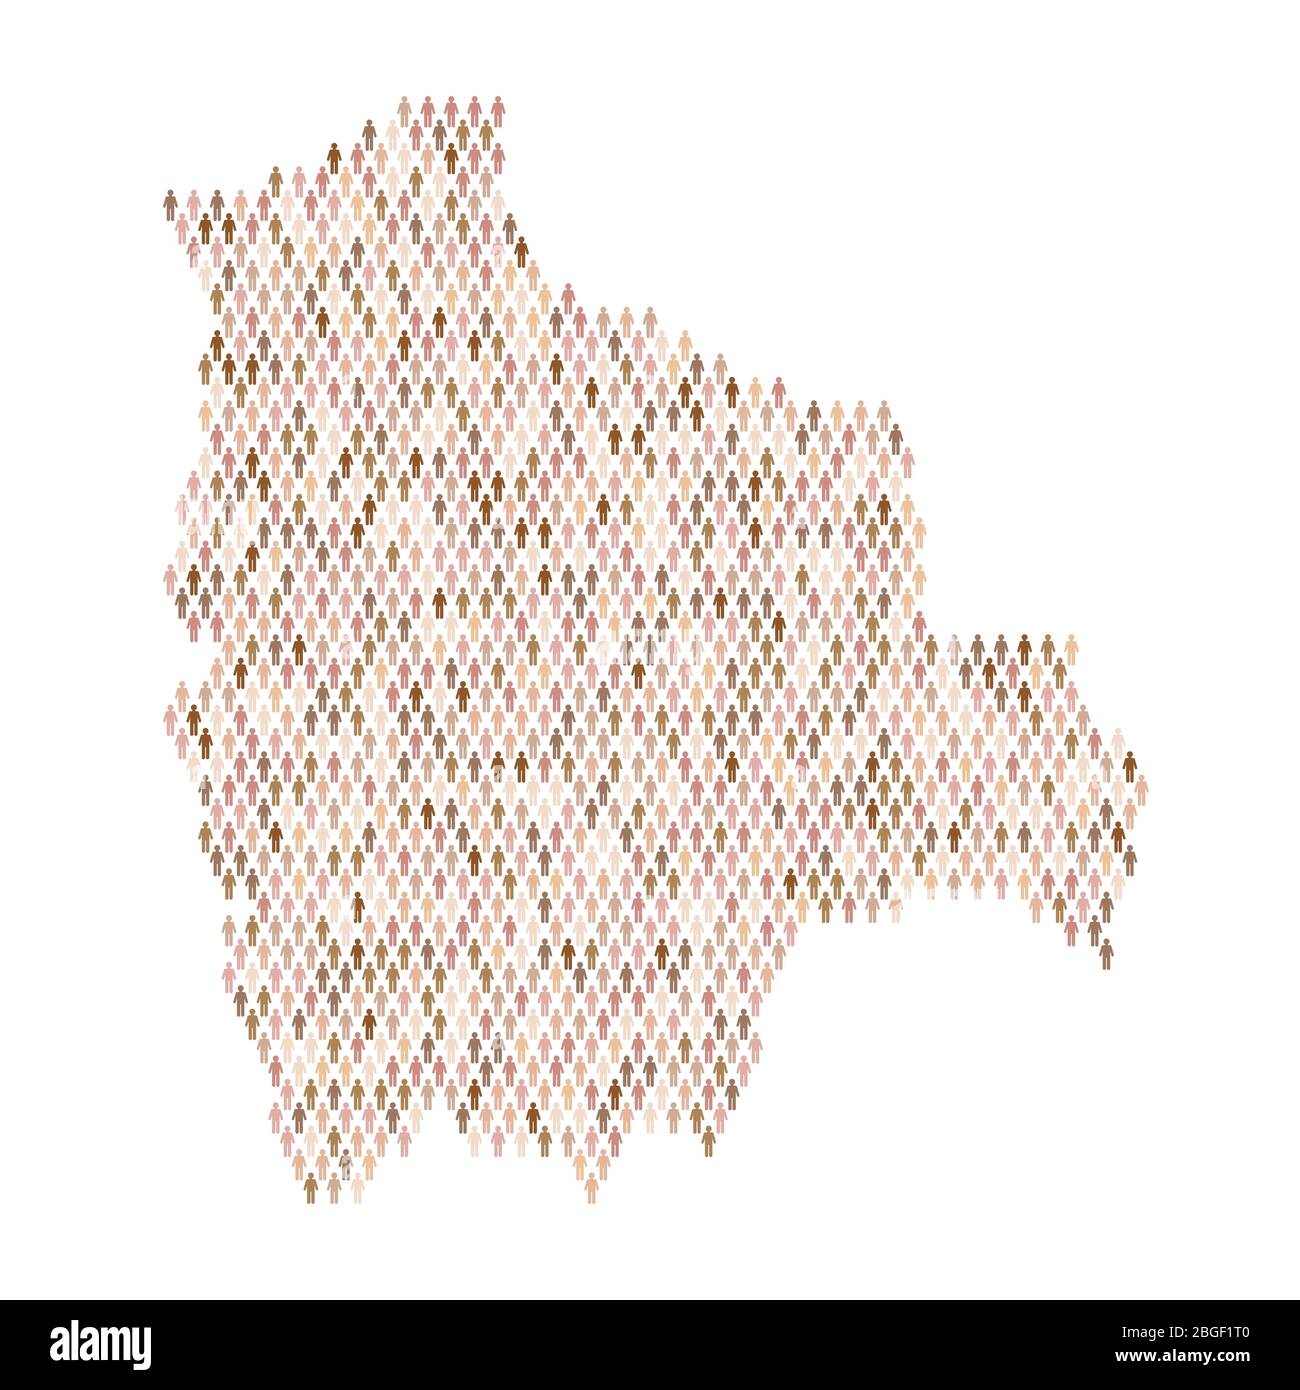 Bolivia population infographic. Map made from stick figure people Stock Vector